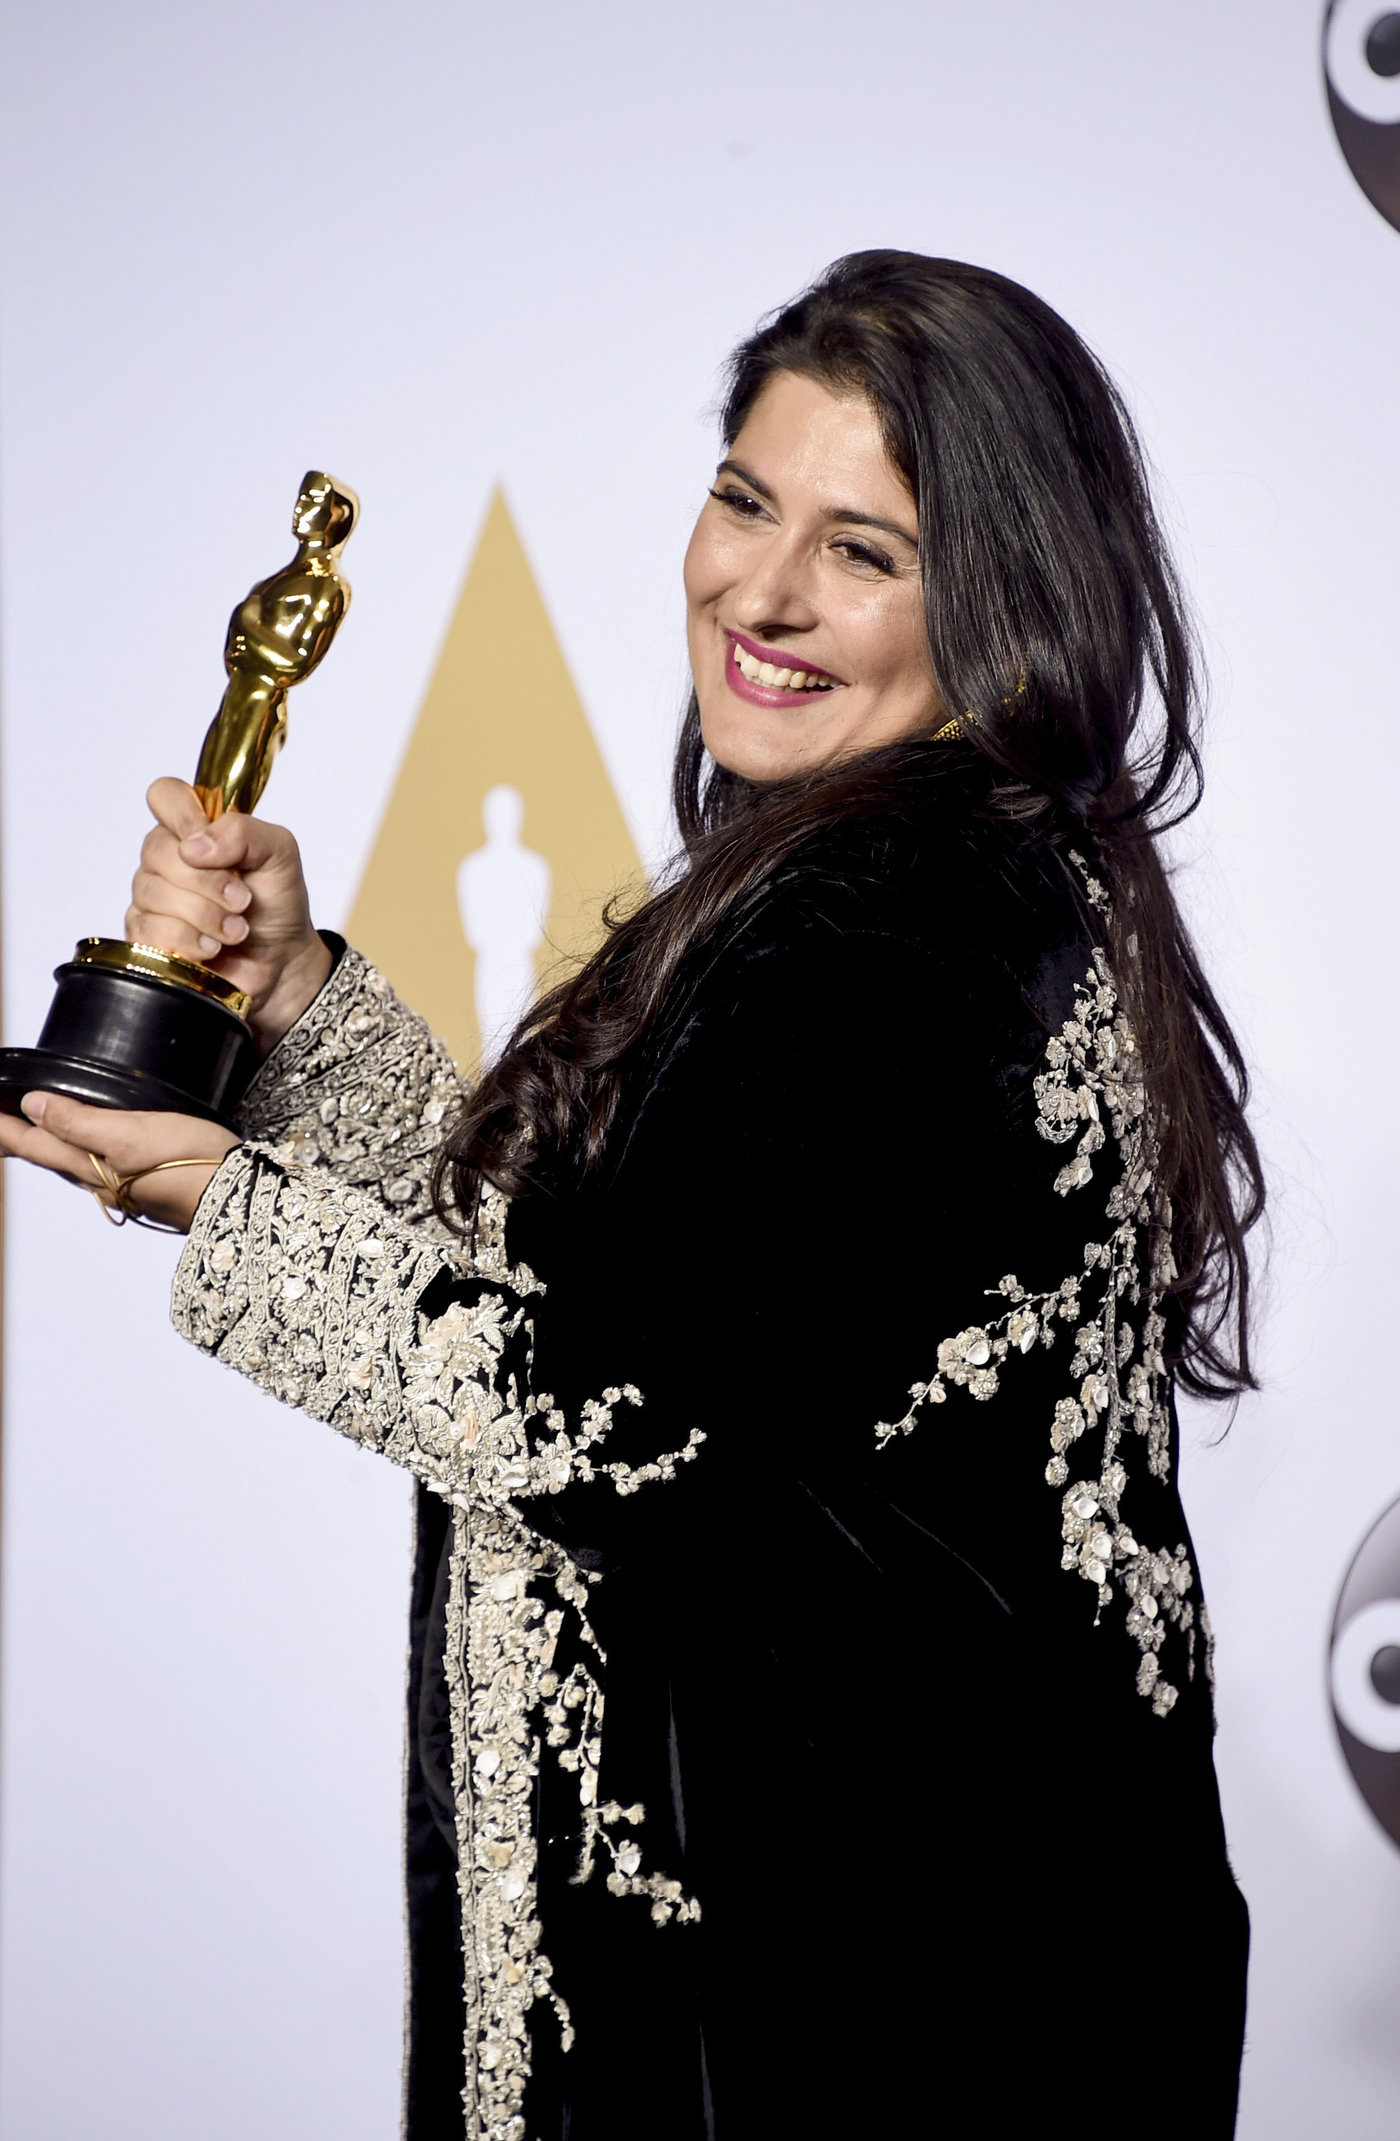 Sharmeen Obaid-Chinoy won the Oscar for best documentary short subject for A Girl in the River: The Price of Forgiveness.